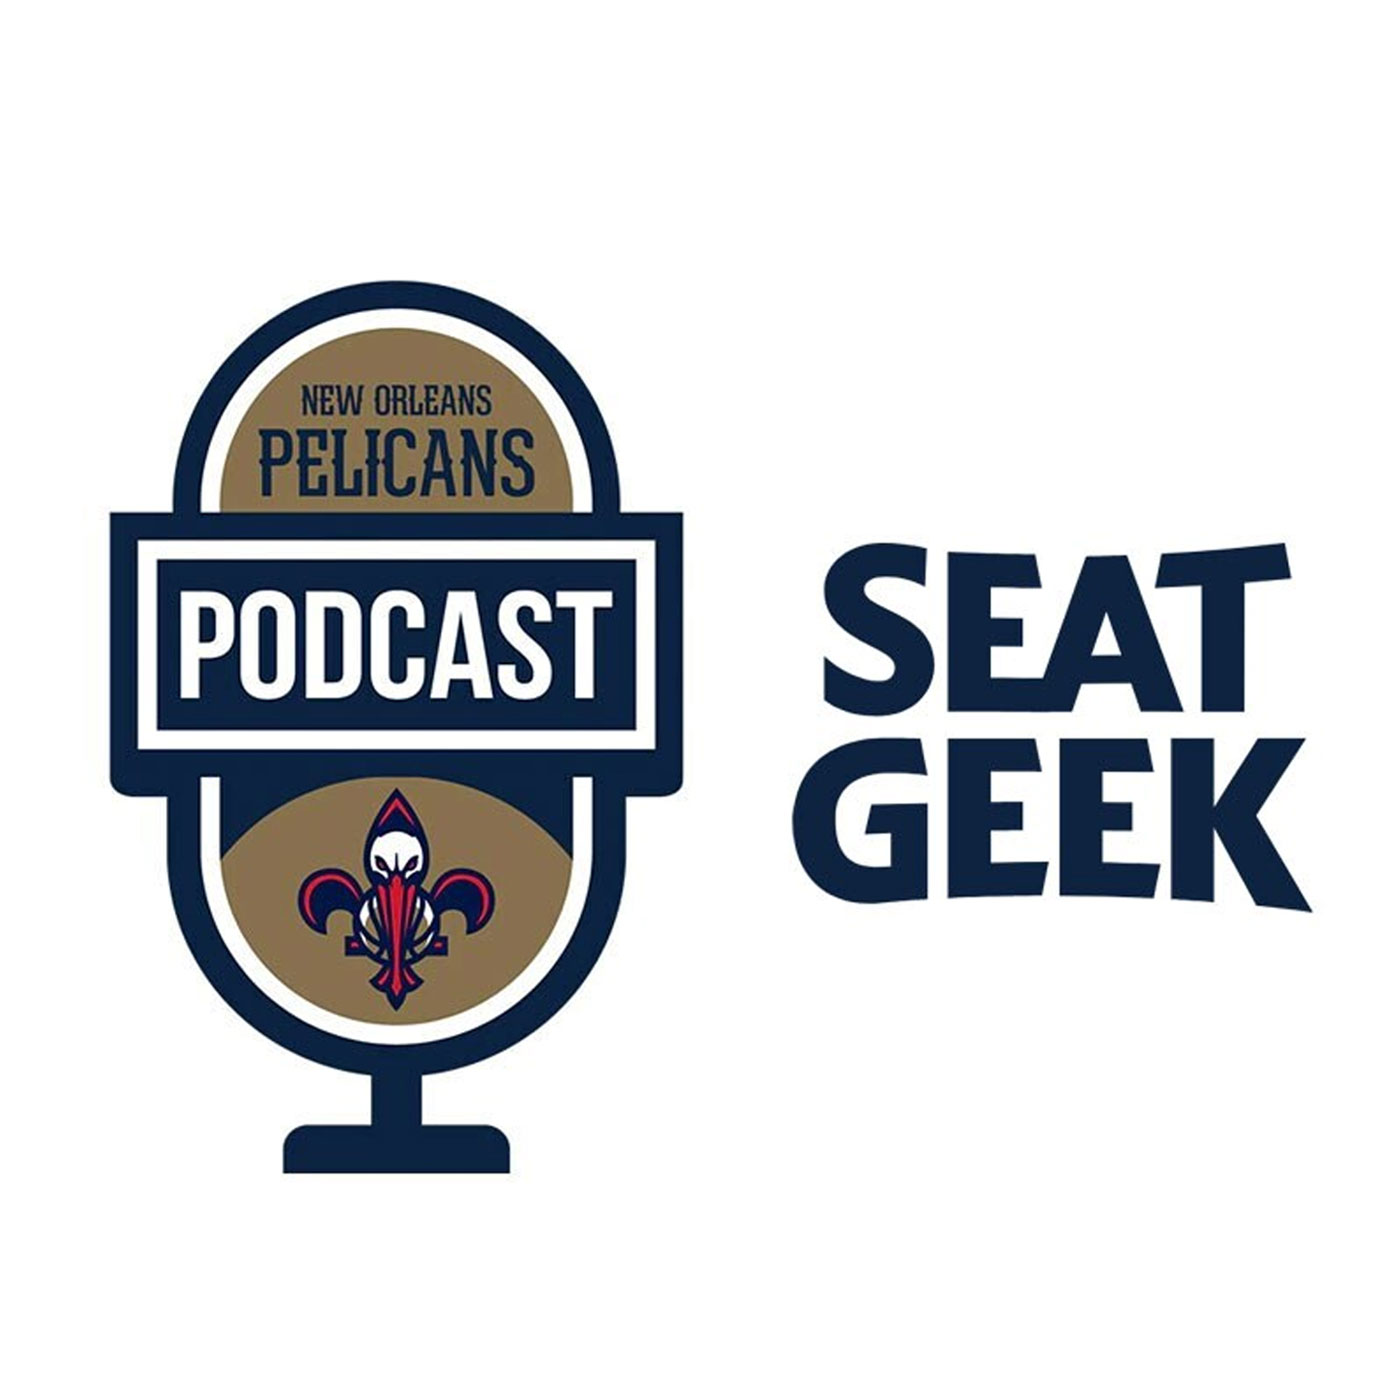 Andrew Lopez on the New Orleans Pelicans Podcast presented by SeatGeek - April 25, 2022